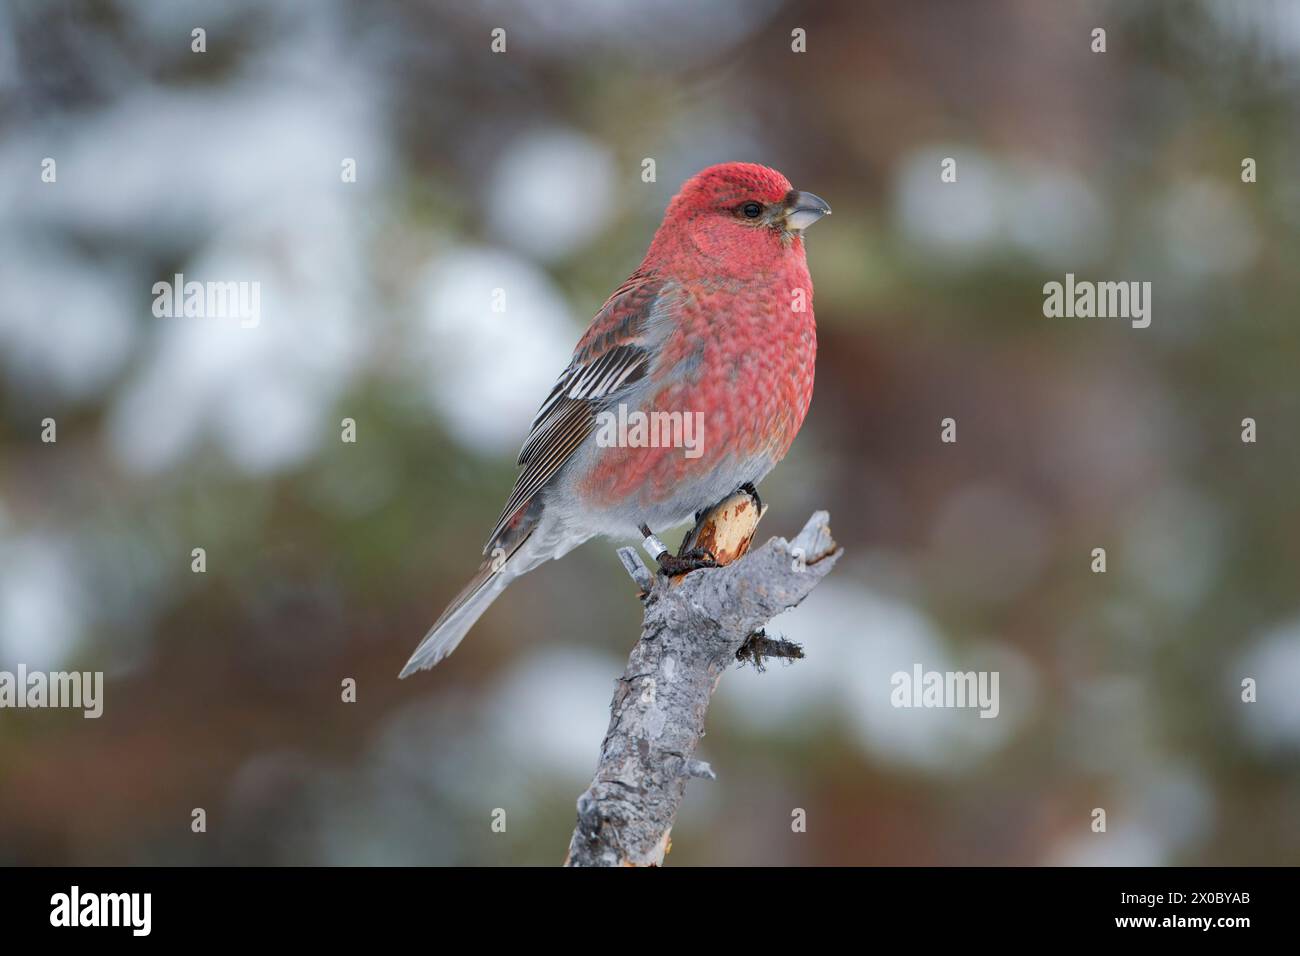 Male pine grosbeak (Pinicola enucleator) perched on a small broken branch among pine trees, showing details of plumage in soft light.  Boreal forest i Stock Photo